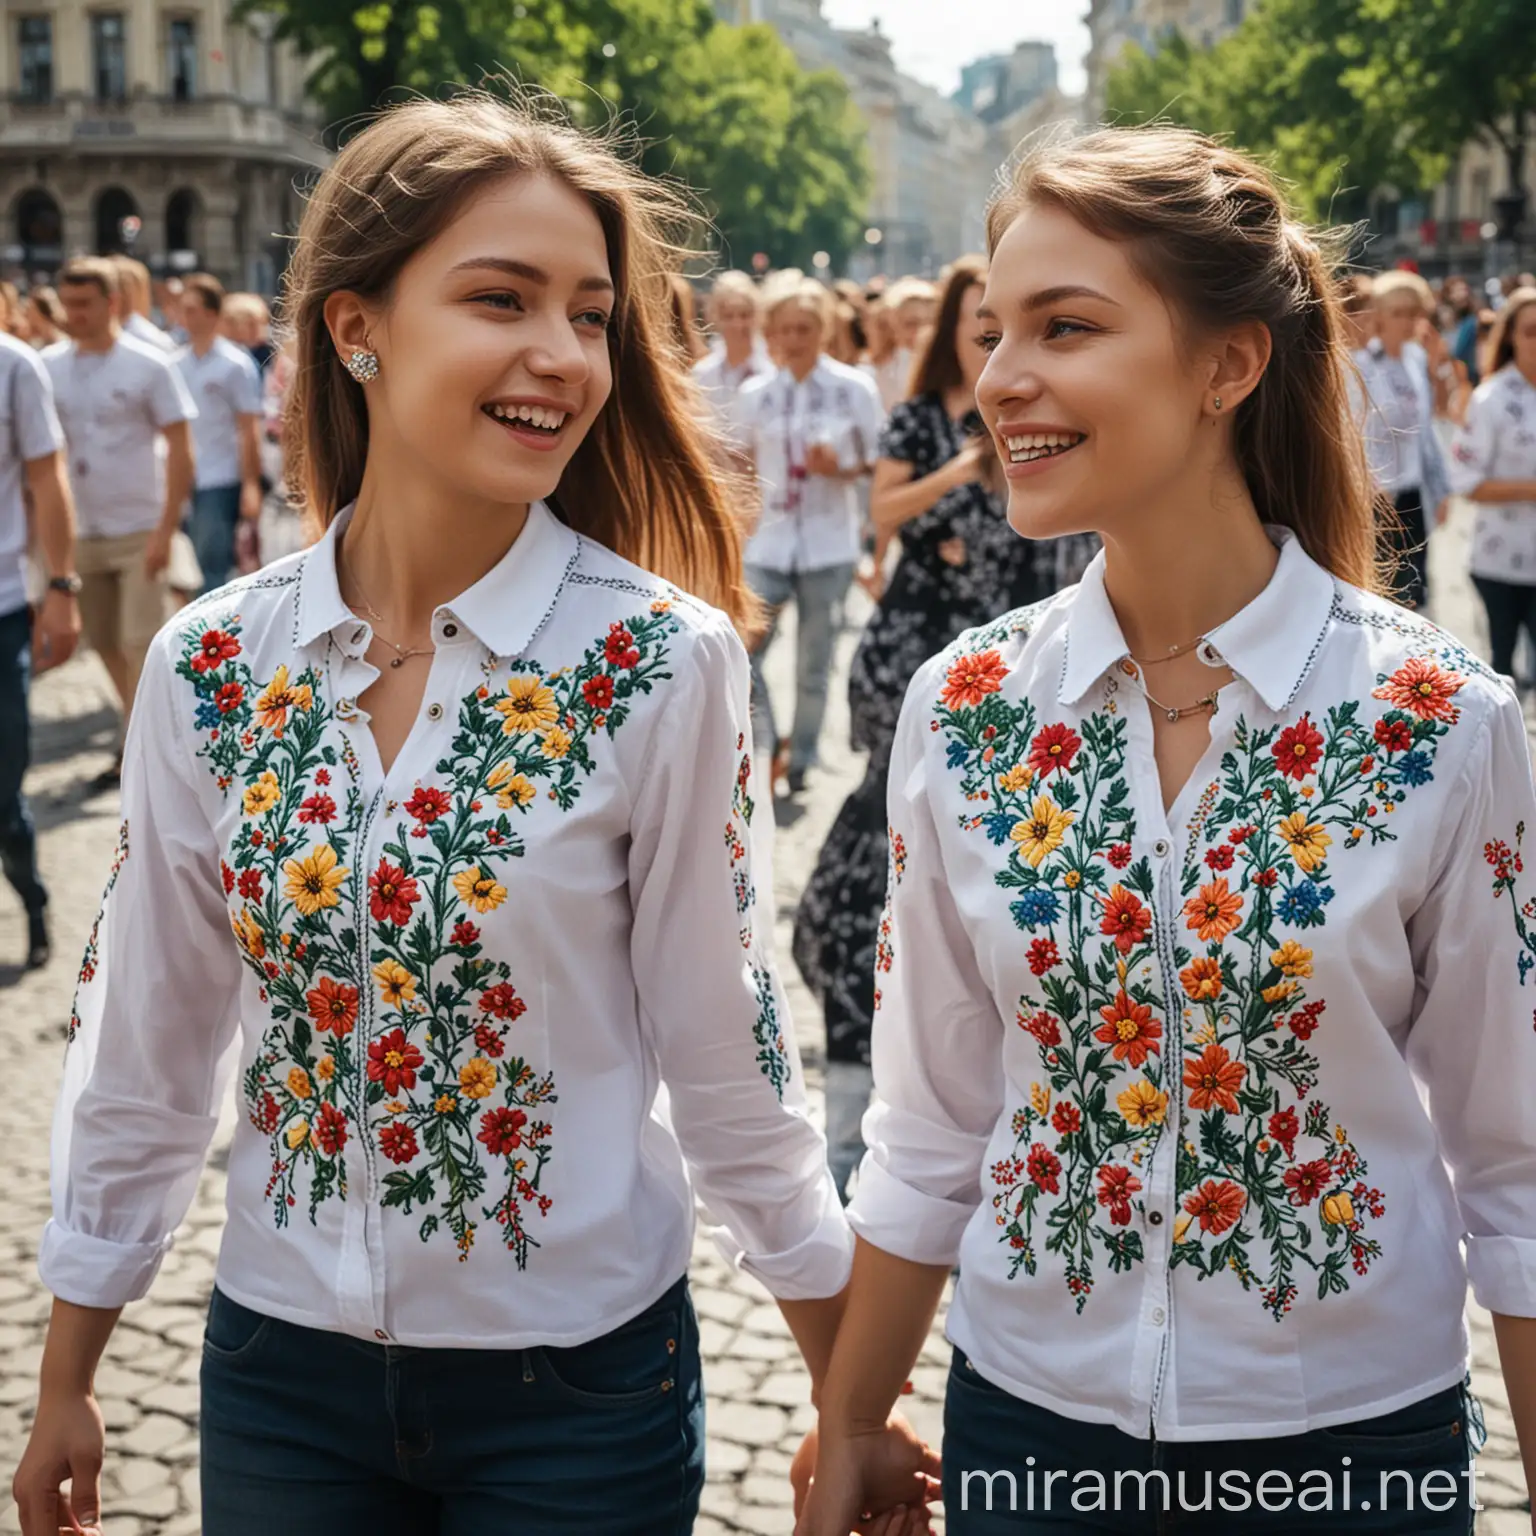 Cheerful Ukrainians in Traditional Embroidered Shirts Stroll Along Khreshchatyk with Flowers